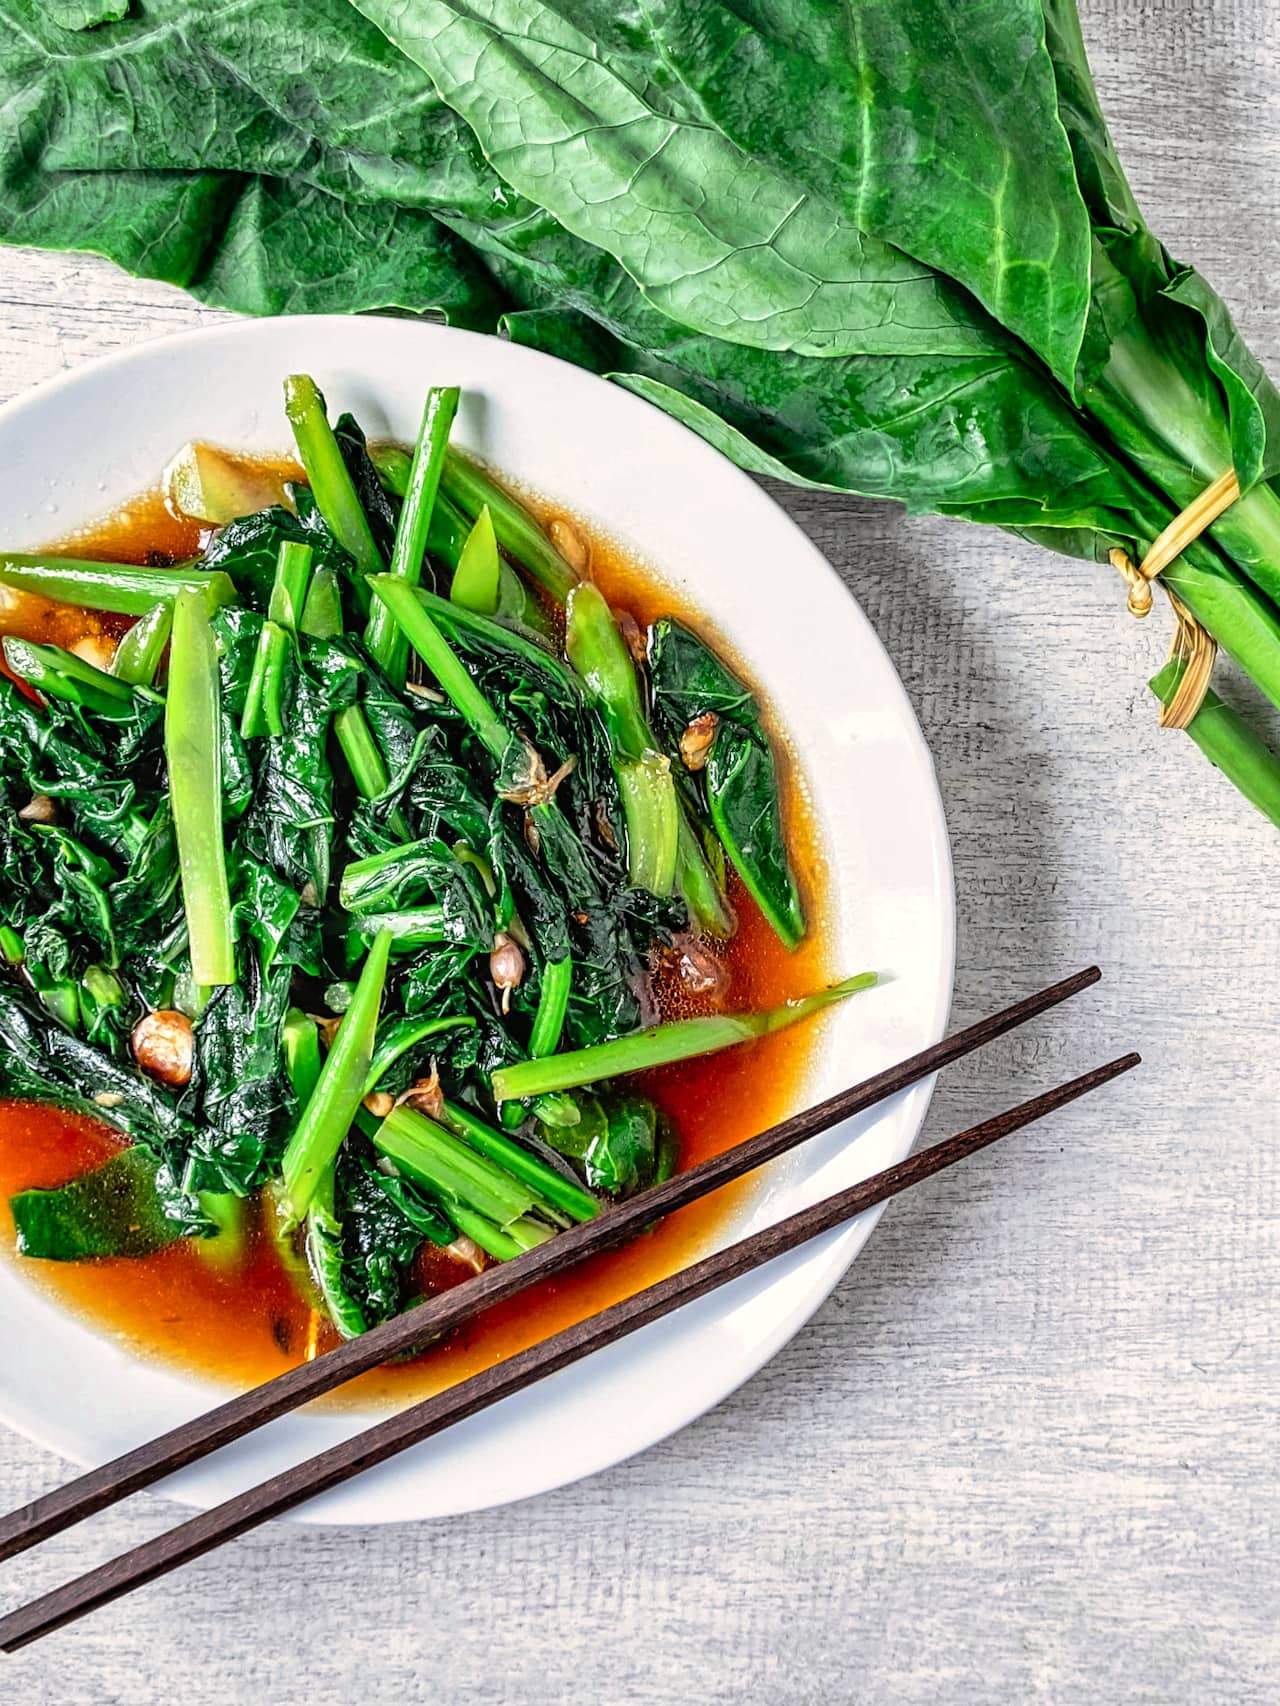 8 Reasons to Try Chinese Broccoli: Healthy and Delicious!